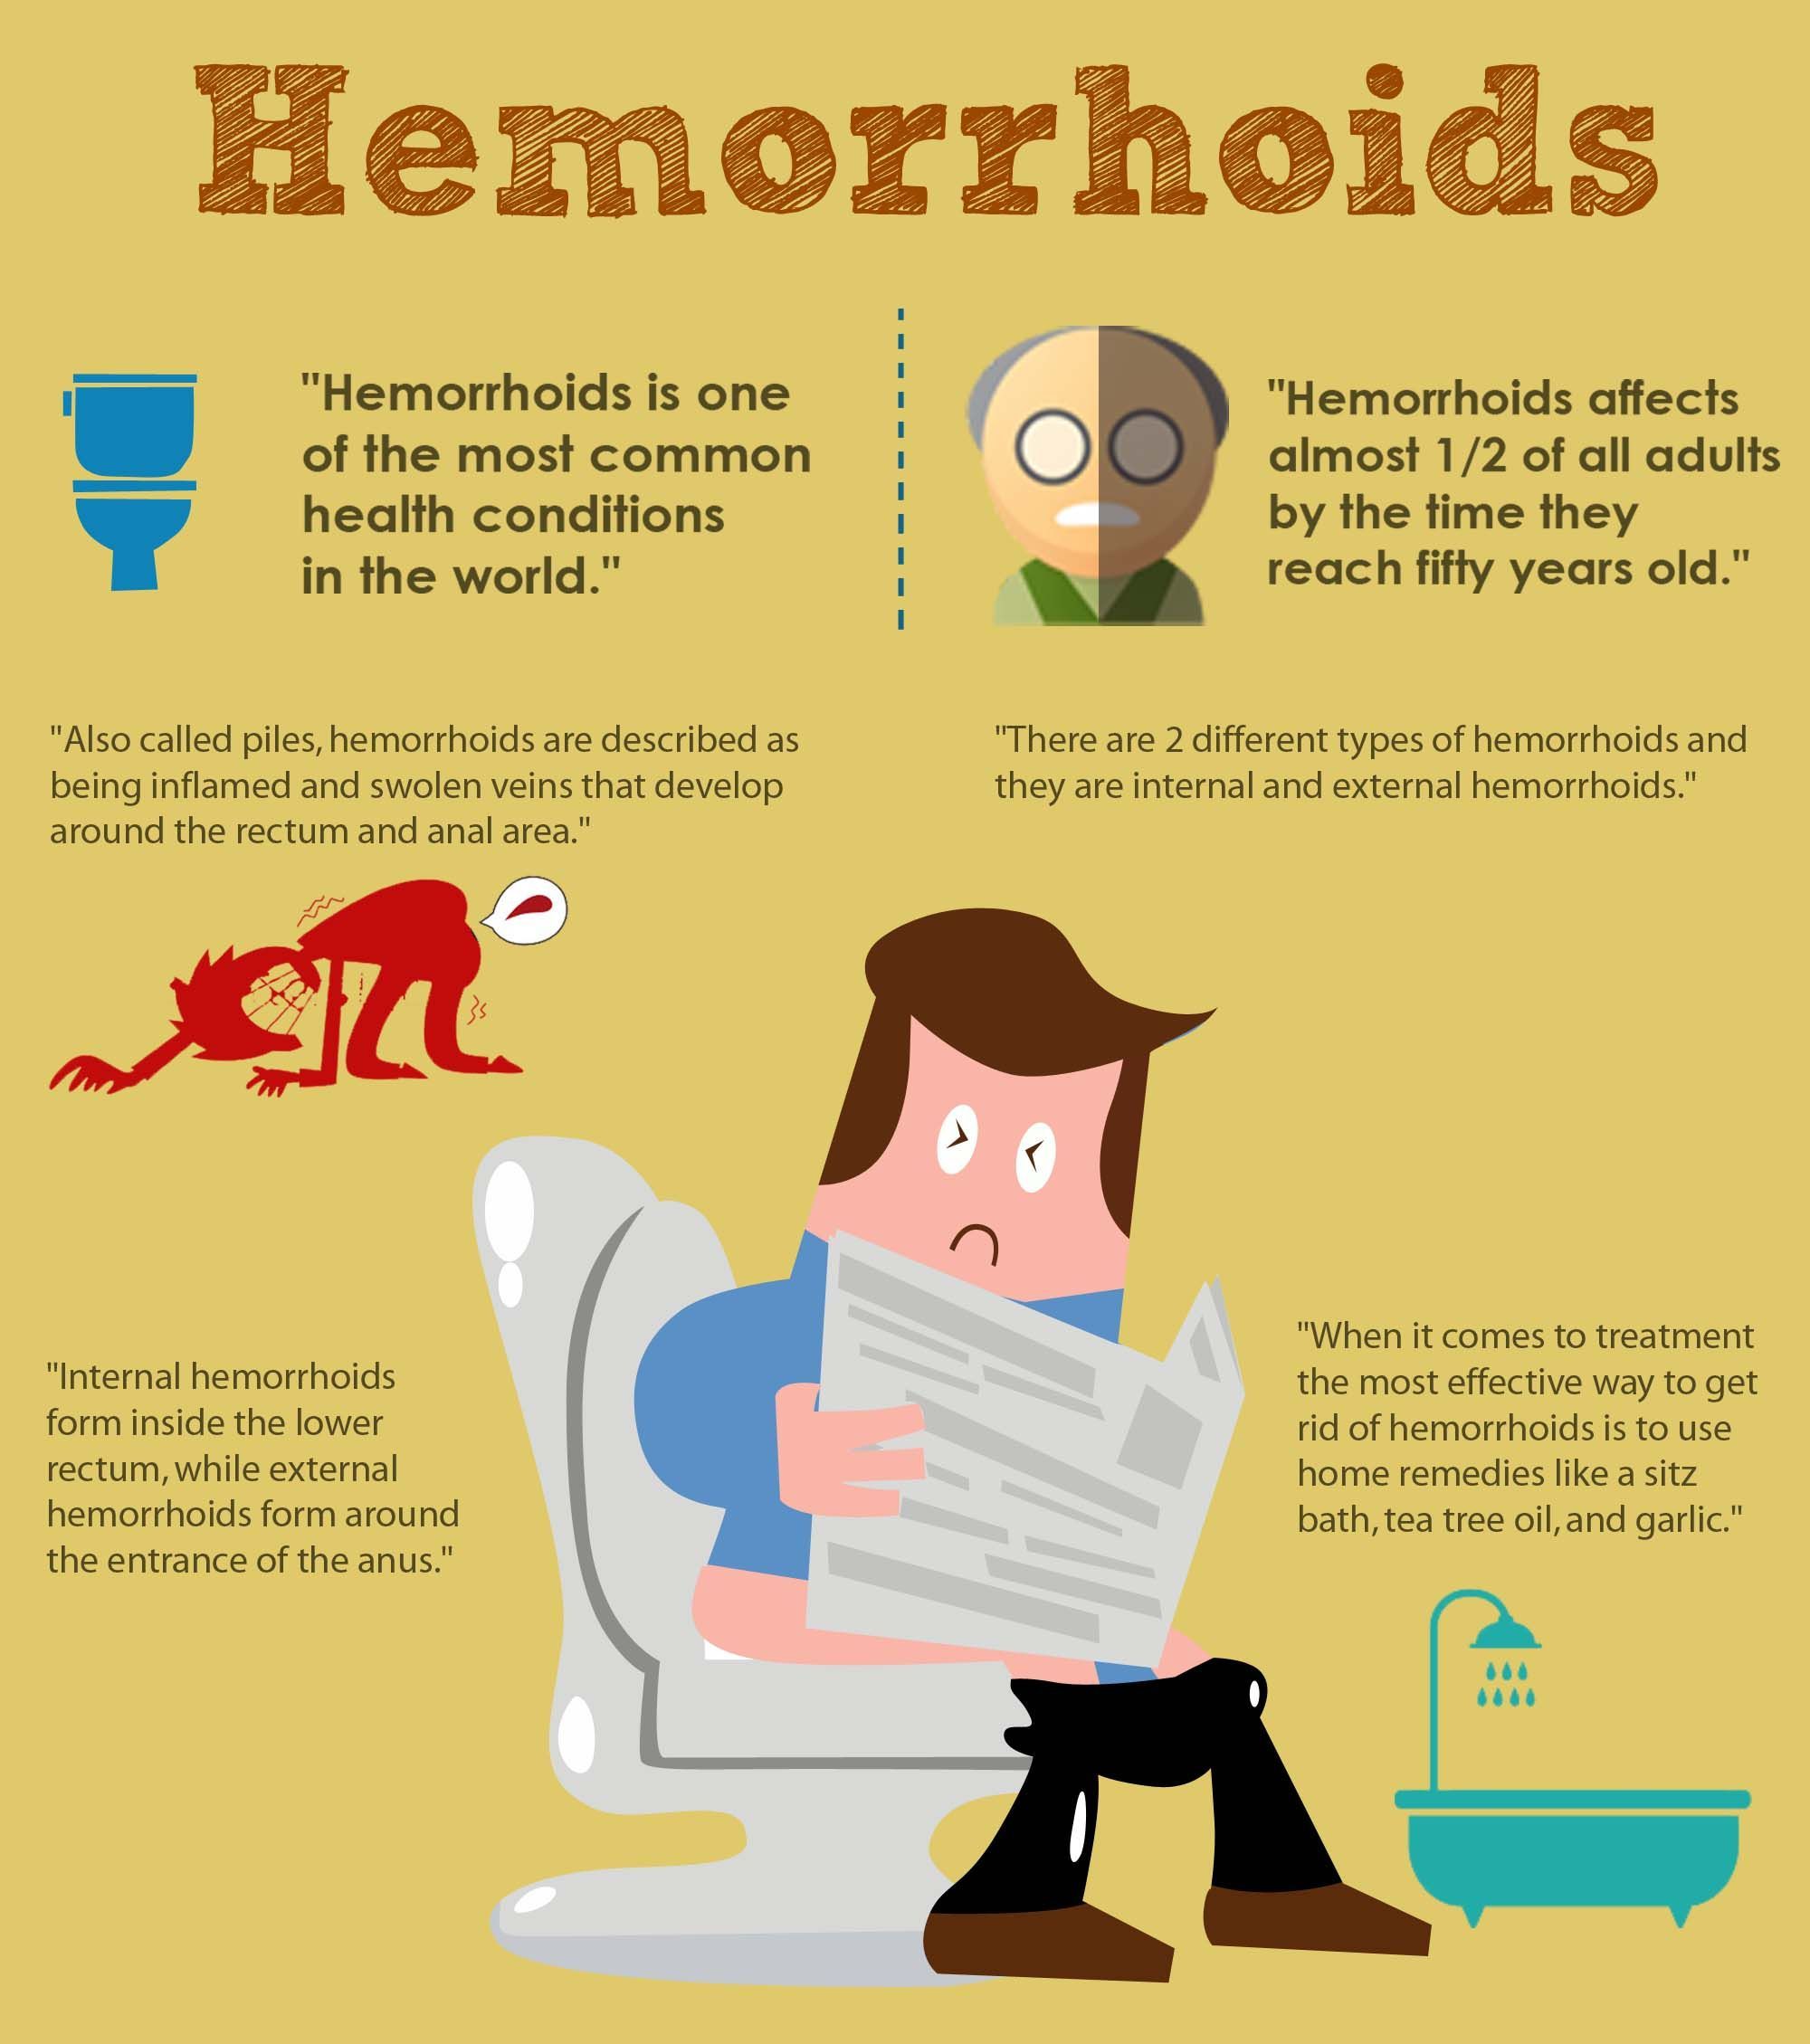 Pin by Make Hemorrhoids Go Away on Remedies in 2020